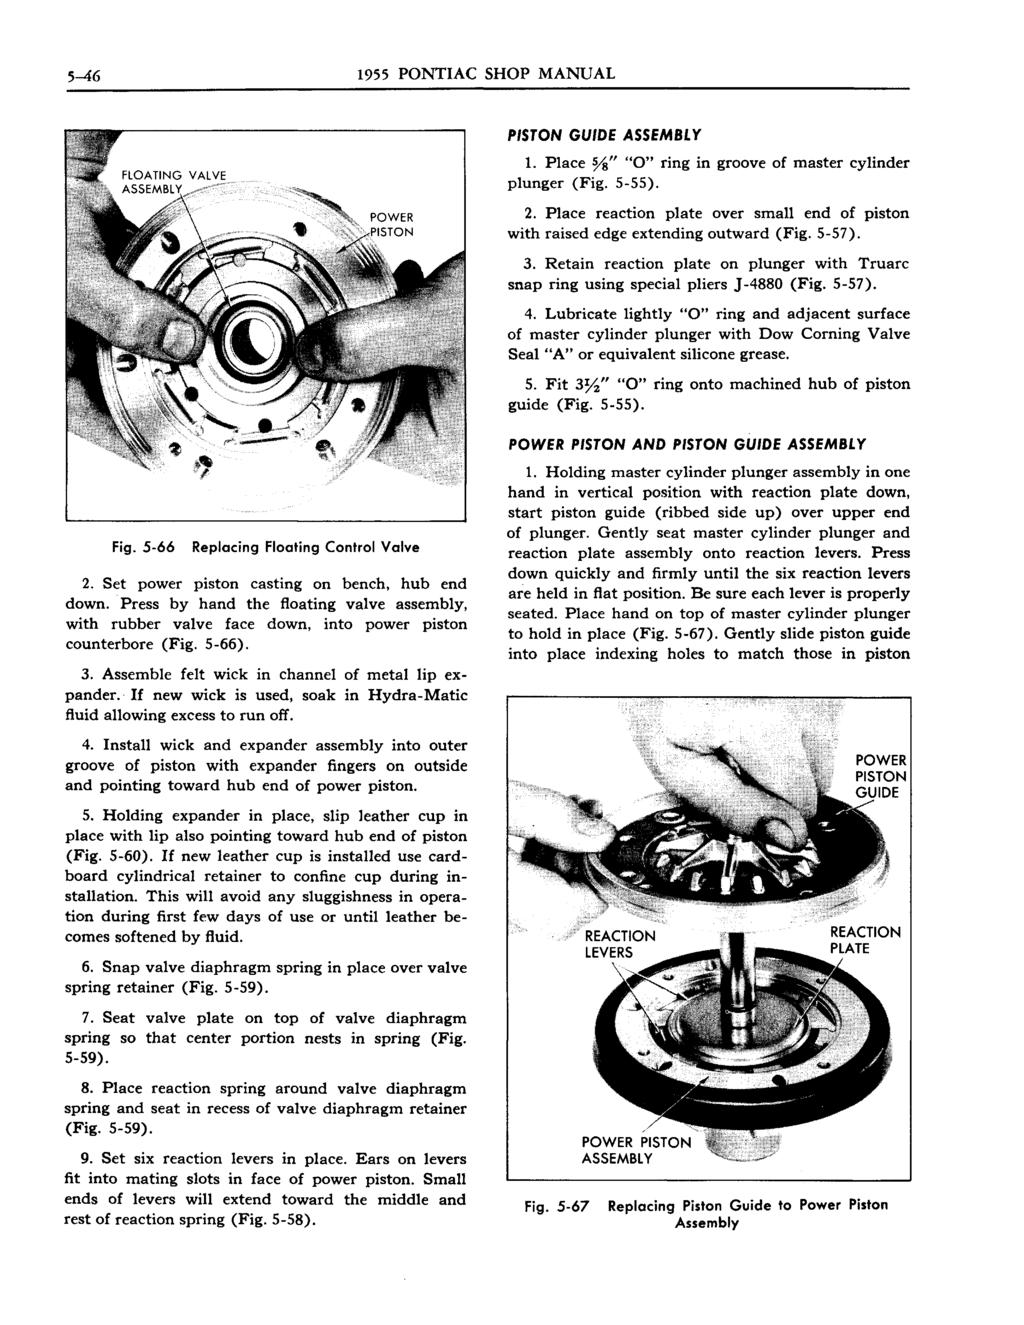 5-46 1955 PONTIAC SHOP MANUAL PISTON GUIDE ASSEMBLY 1. Place %" "0" ring in groove of master cylinder plunger (Fig. 5-55). 2.